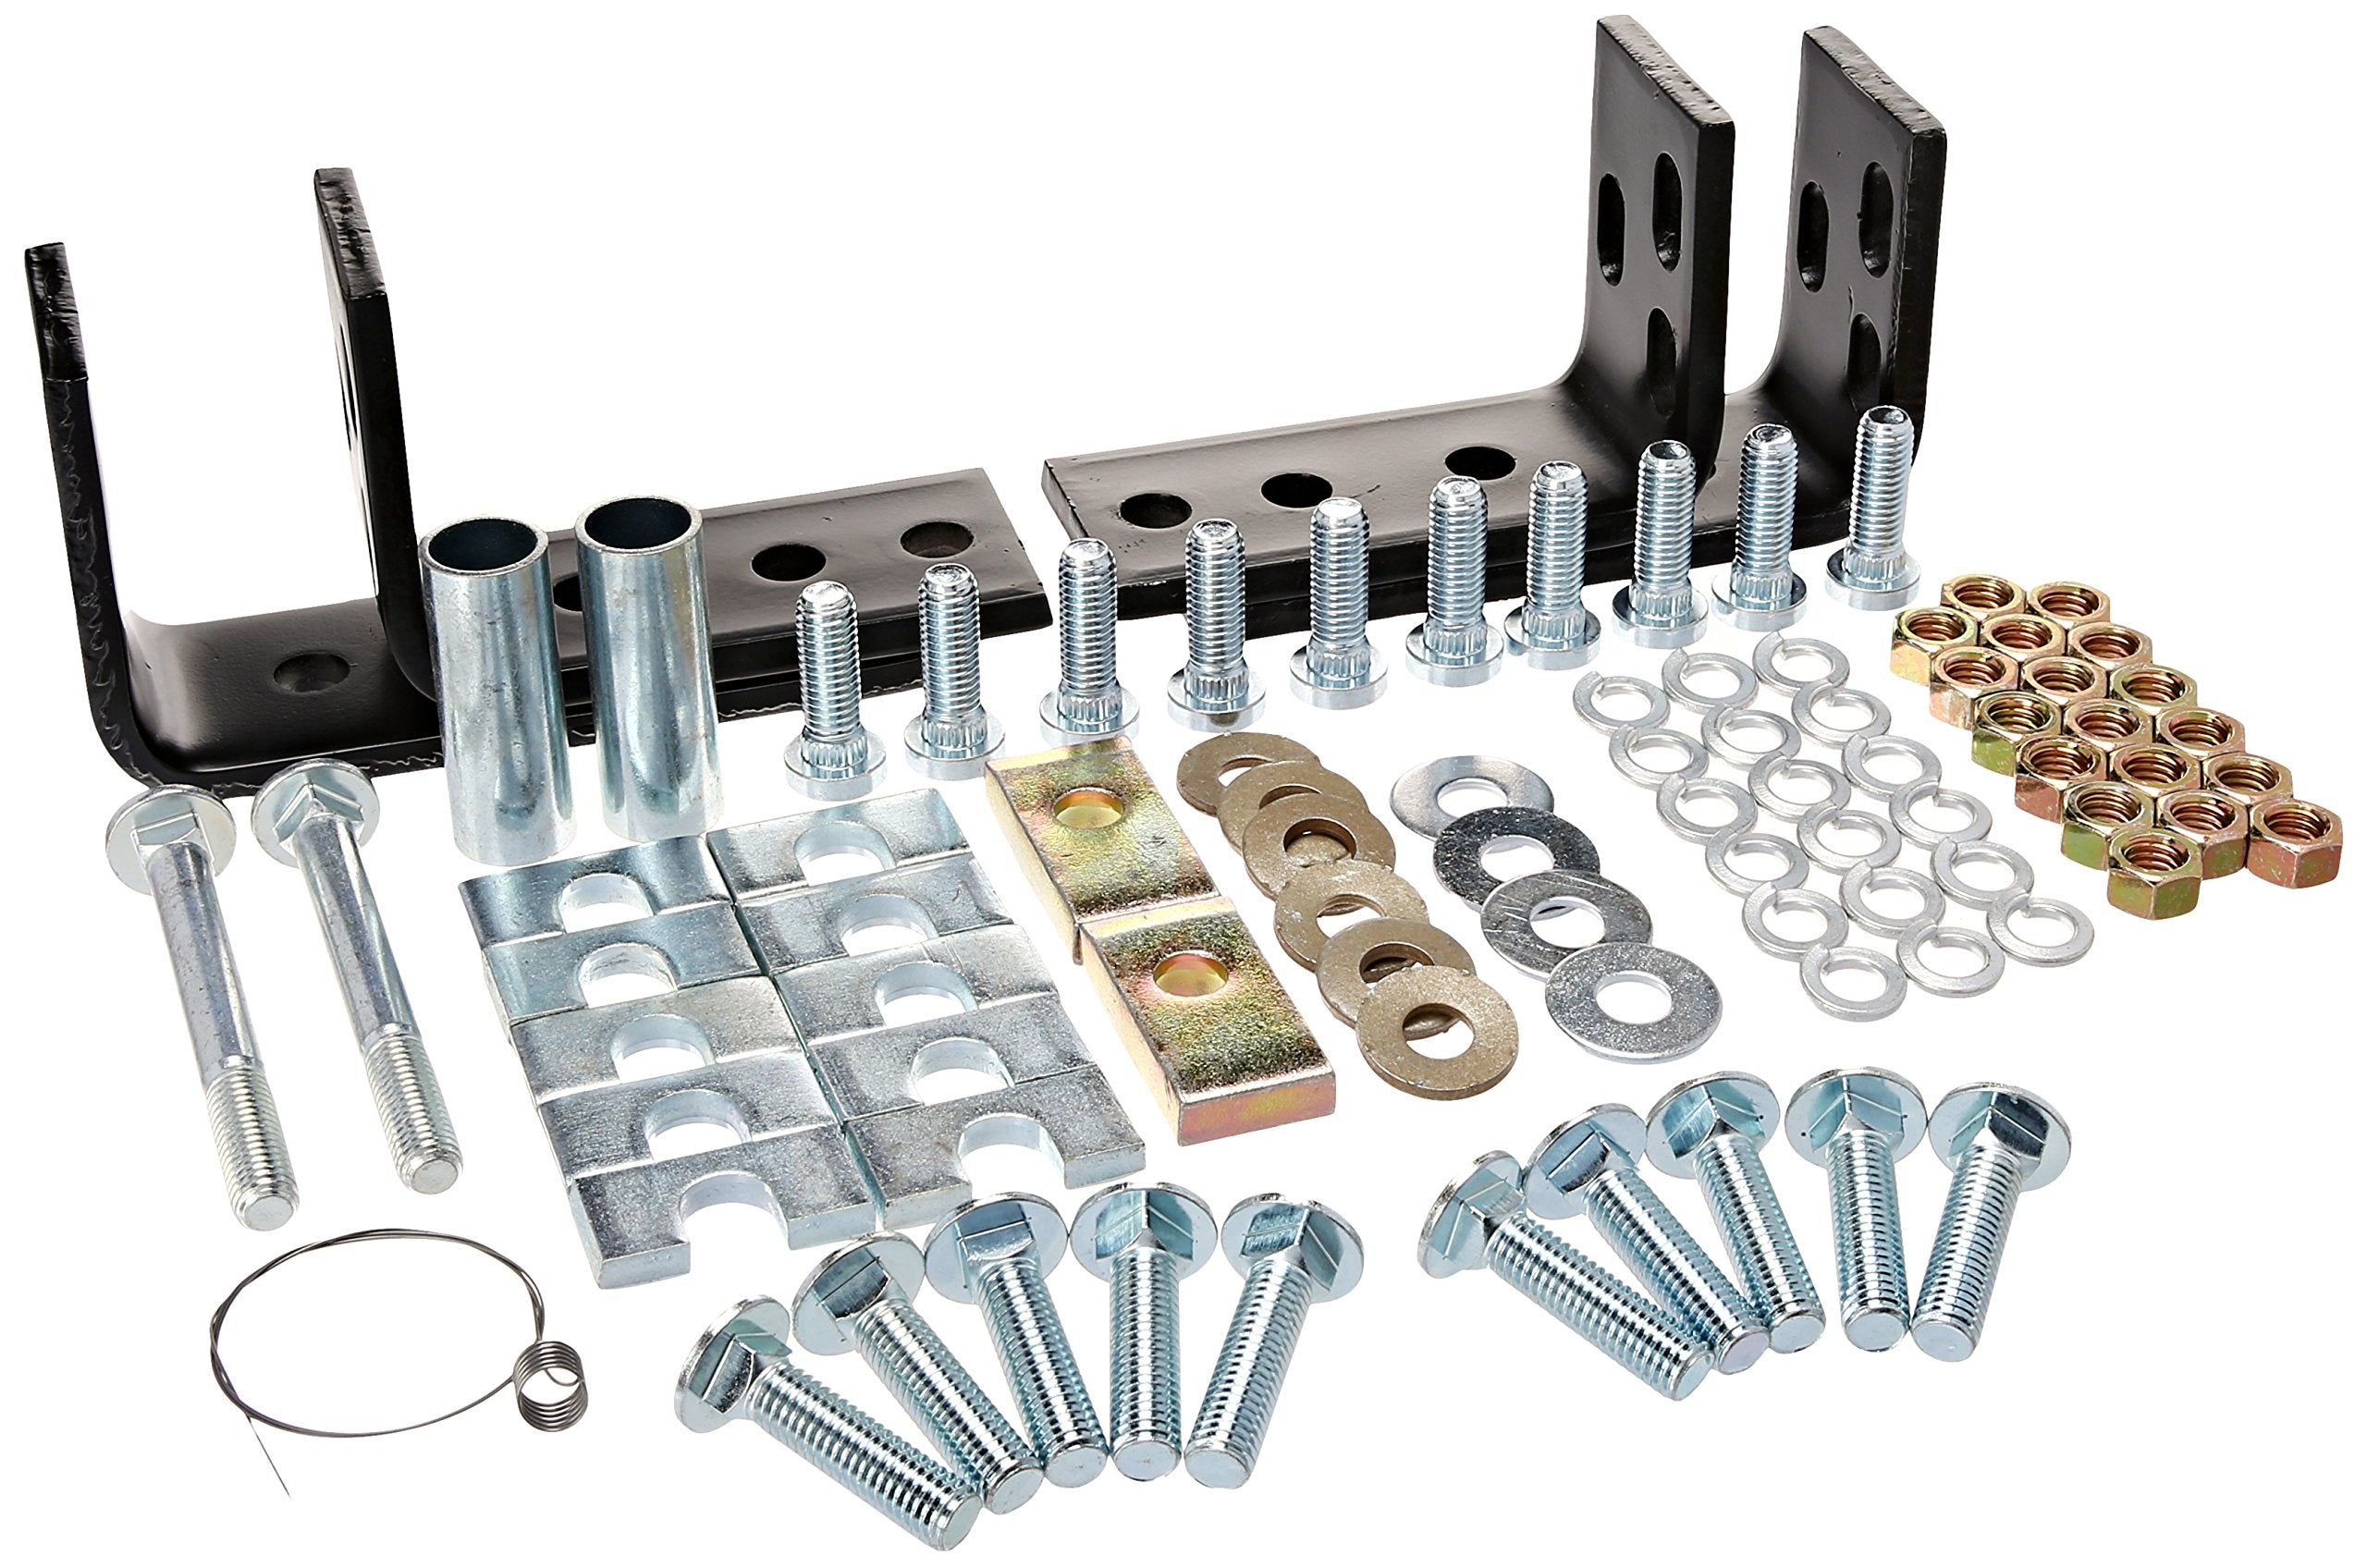 Reese 0225.0018 30439 Fifth Wheel Installation Kit for 30035 and 58058 (10-Bolt Design)